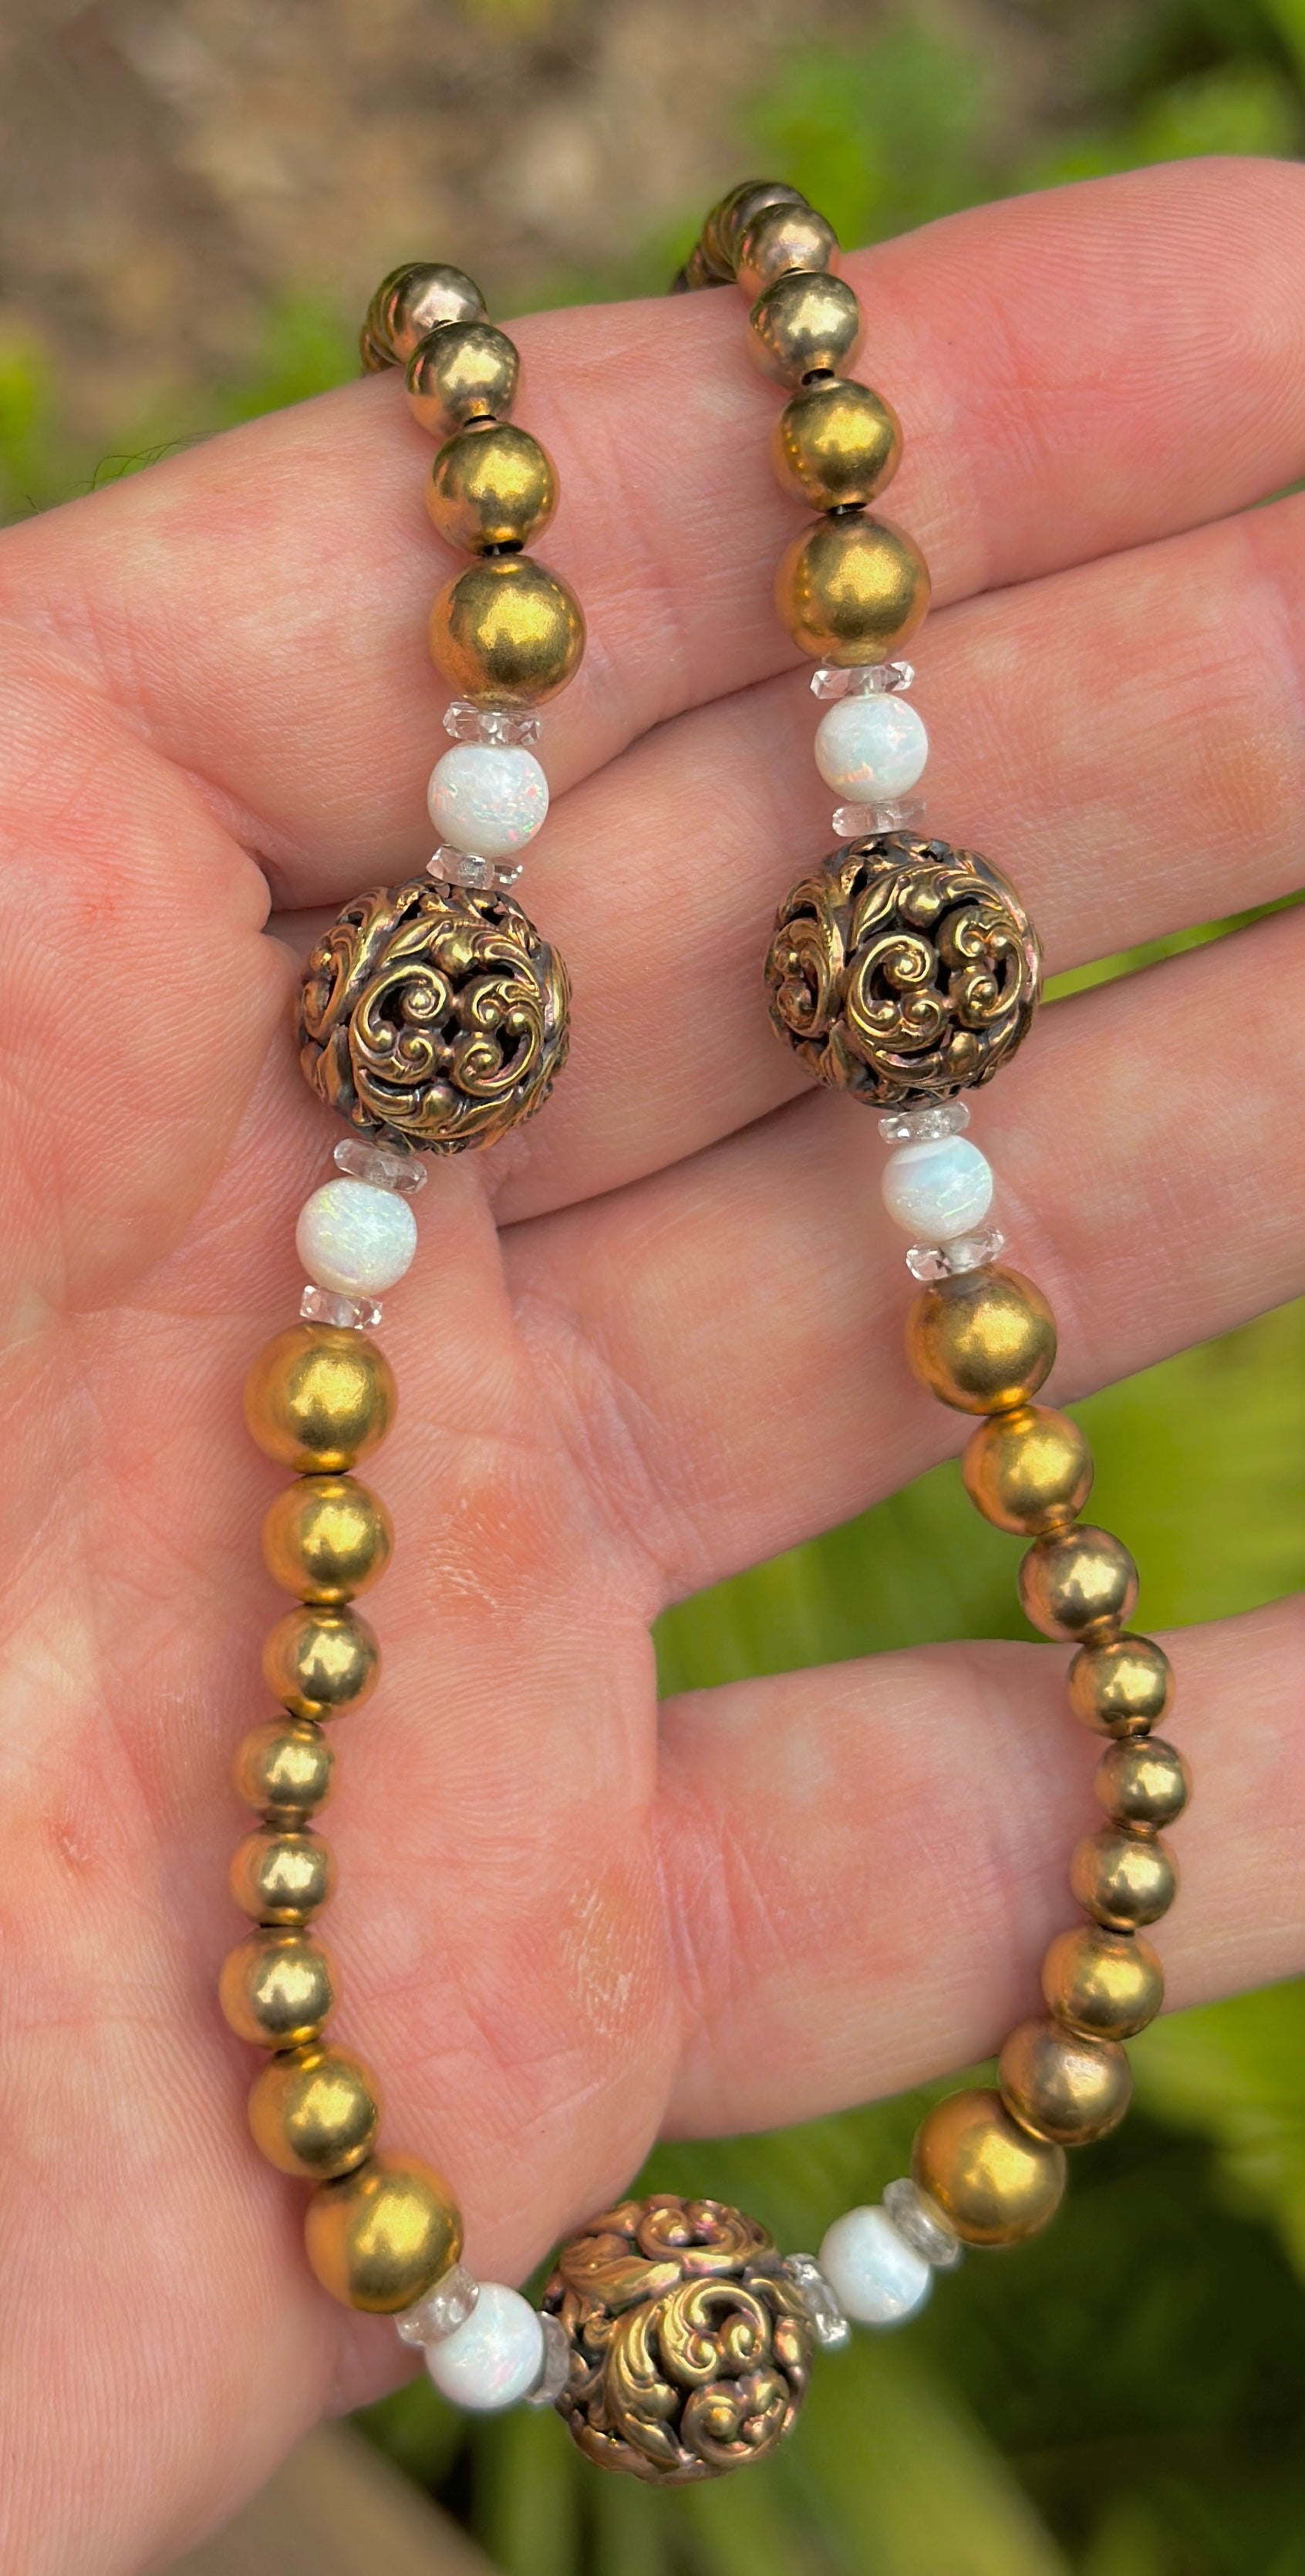 INDULGE IN THIS RARE ANTIQUE VICTORIAN OPAL, ROCK CRYSTAL AND GOLD BEAD NECKLACE.  THE EXTRAORDINARY JEWEL HAS THREE OPEN WORK GOLD ACANTHUS LEAF MOTIF BEADS OF GREAT BEAUTY.  ON EITHER SIDE OF THE FLOWER MOTIF BEADS ARE SPECTACULAR ROUND OPAL BEADS